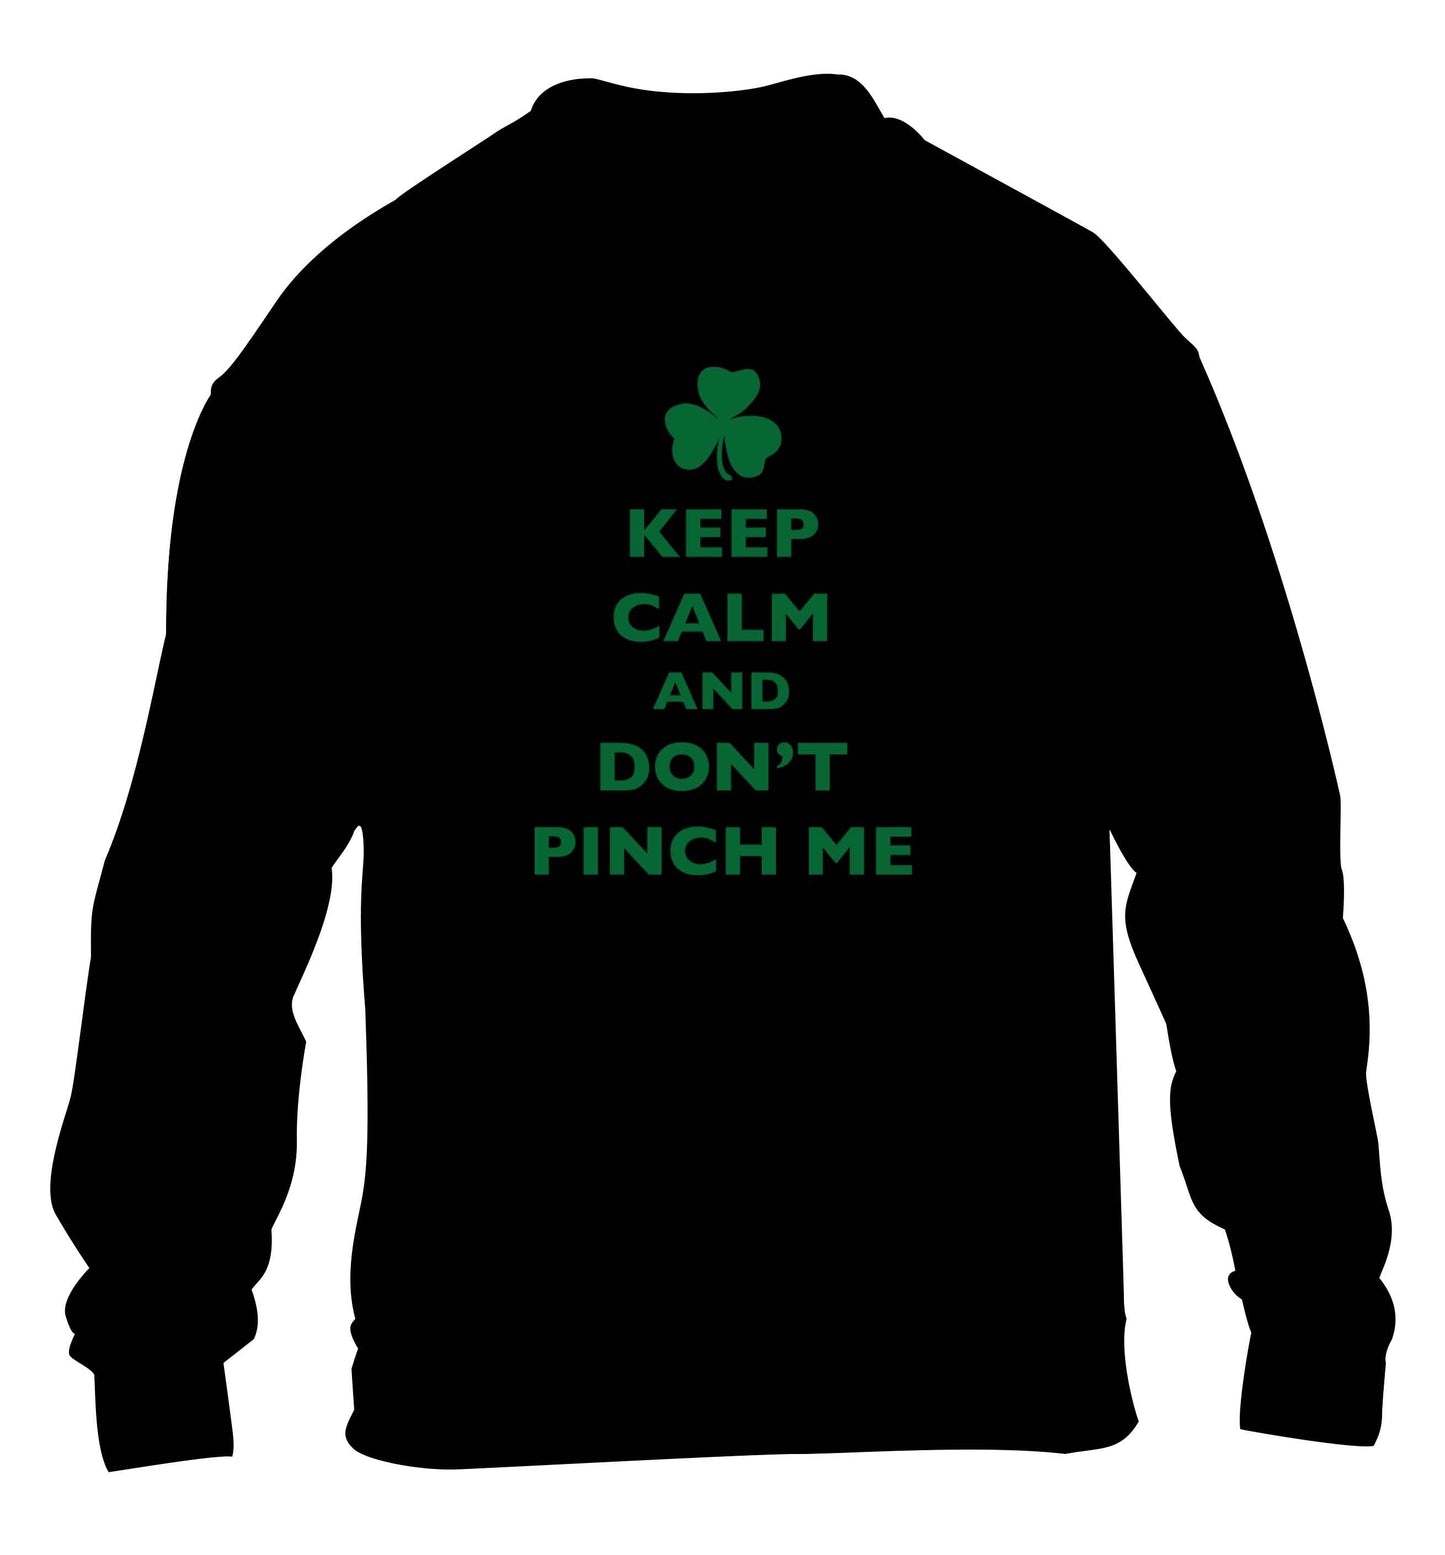 Keep calm and don't pinch me children's black sweater 12-13 Years